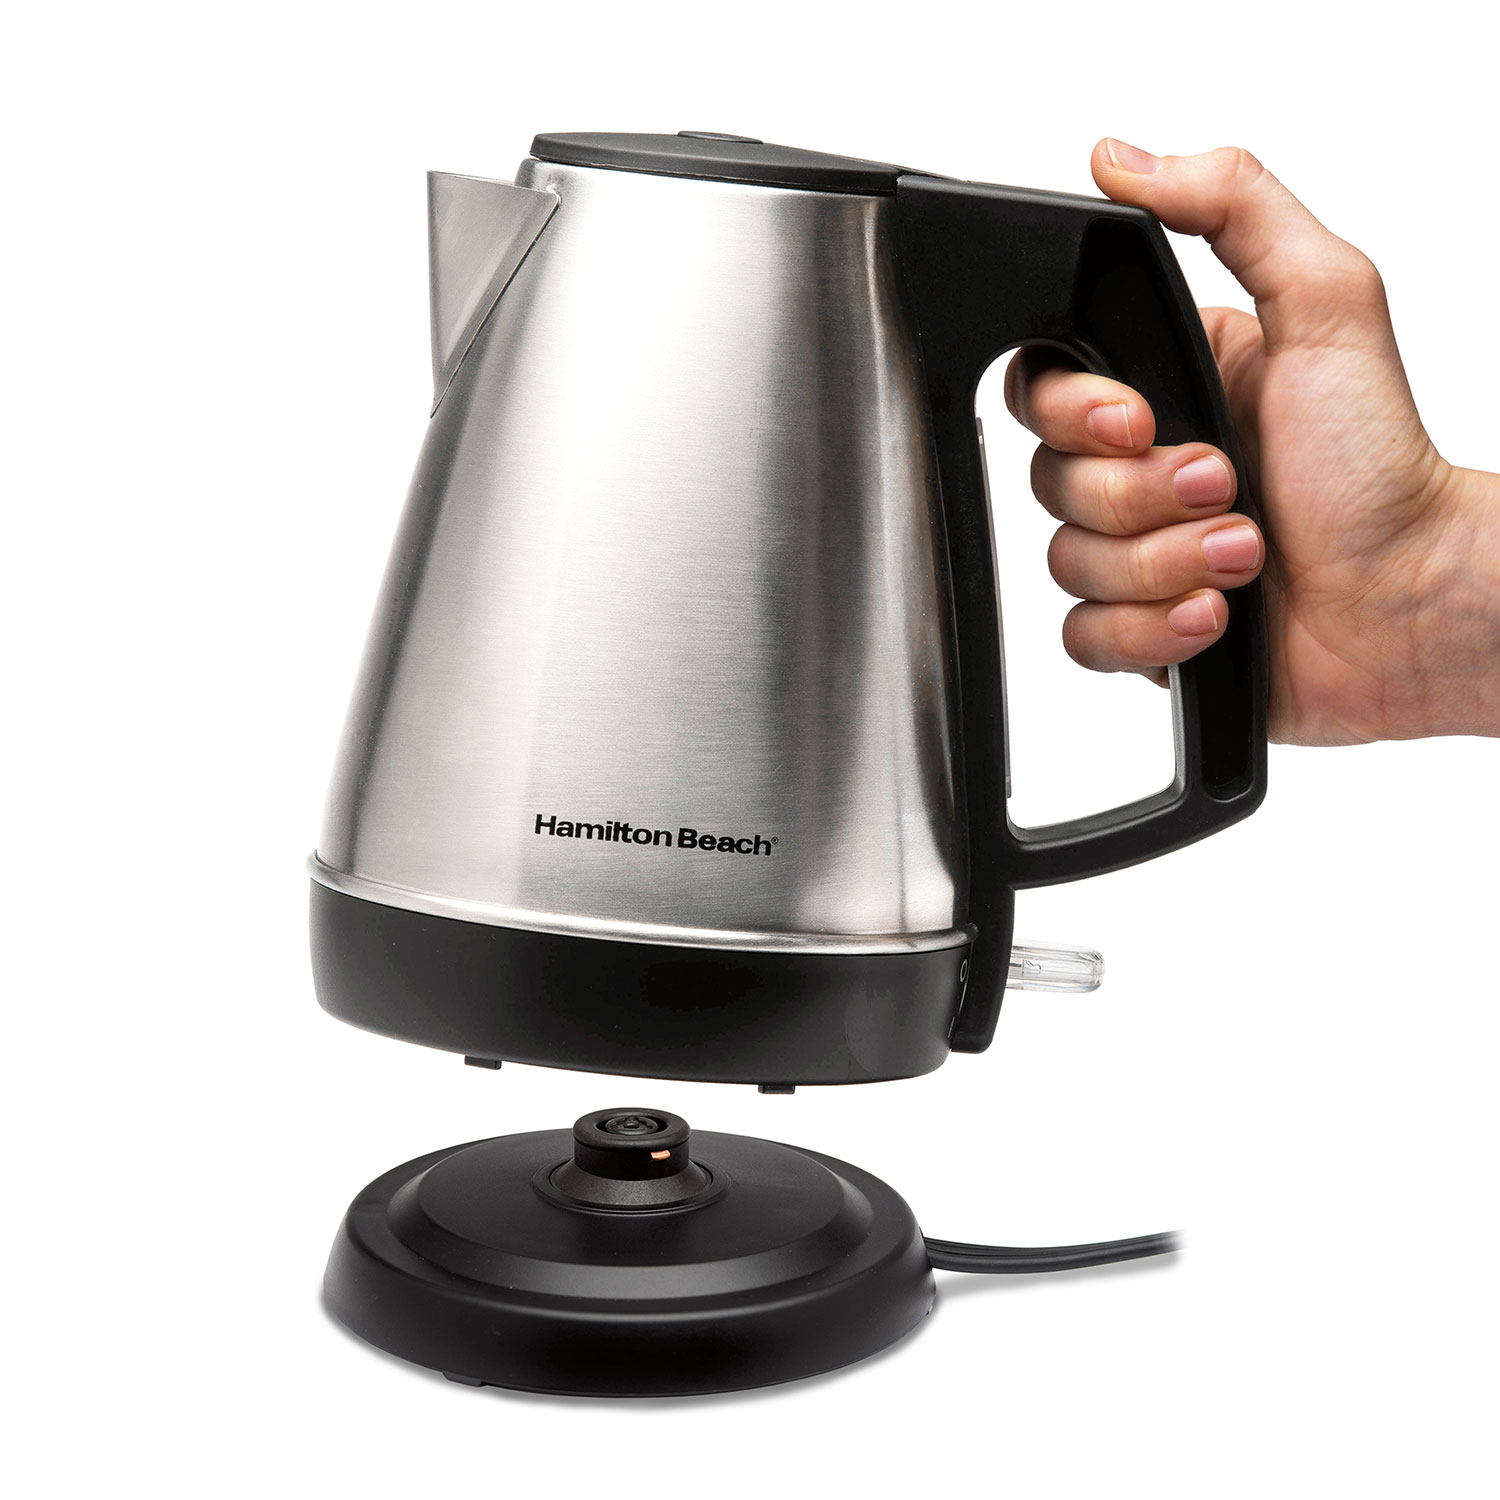 1 Liter Electric Kettle - 40901